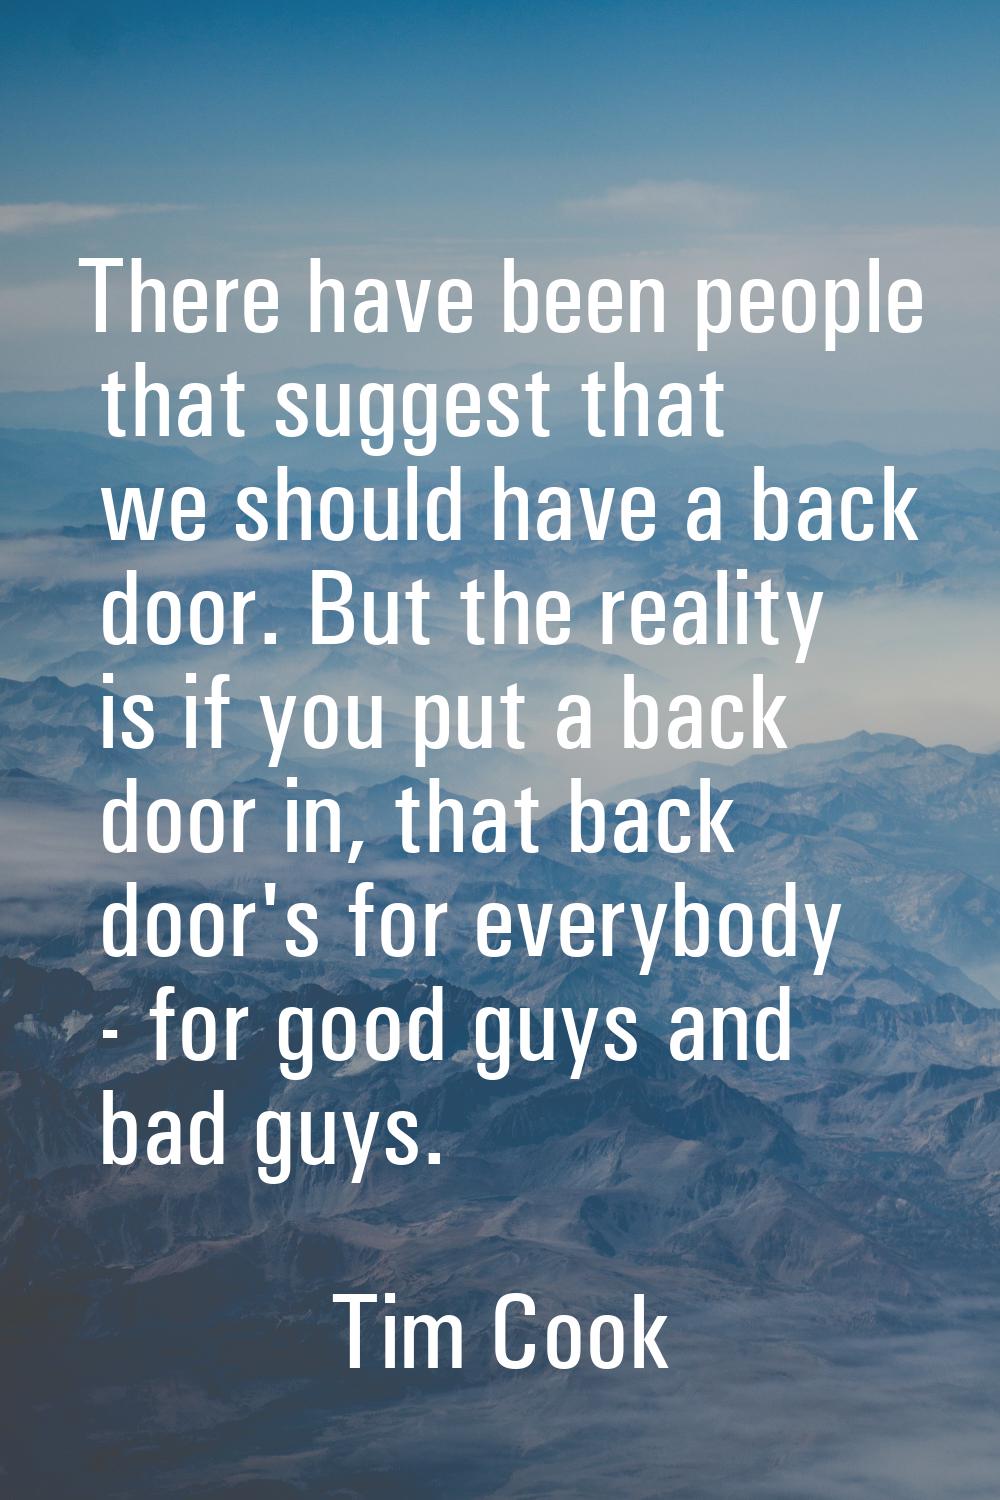 There have been people that suggest that we should have a back door. But the reality is if you put 